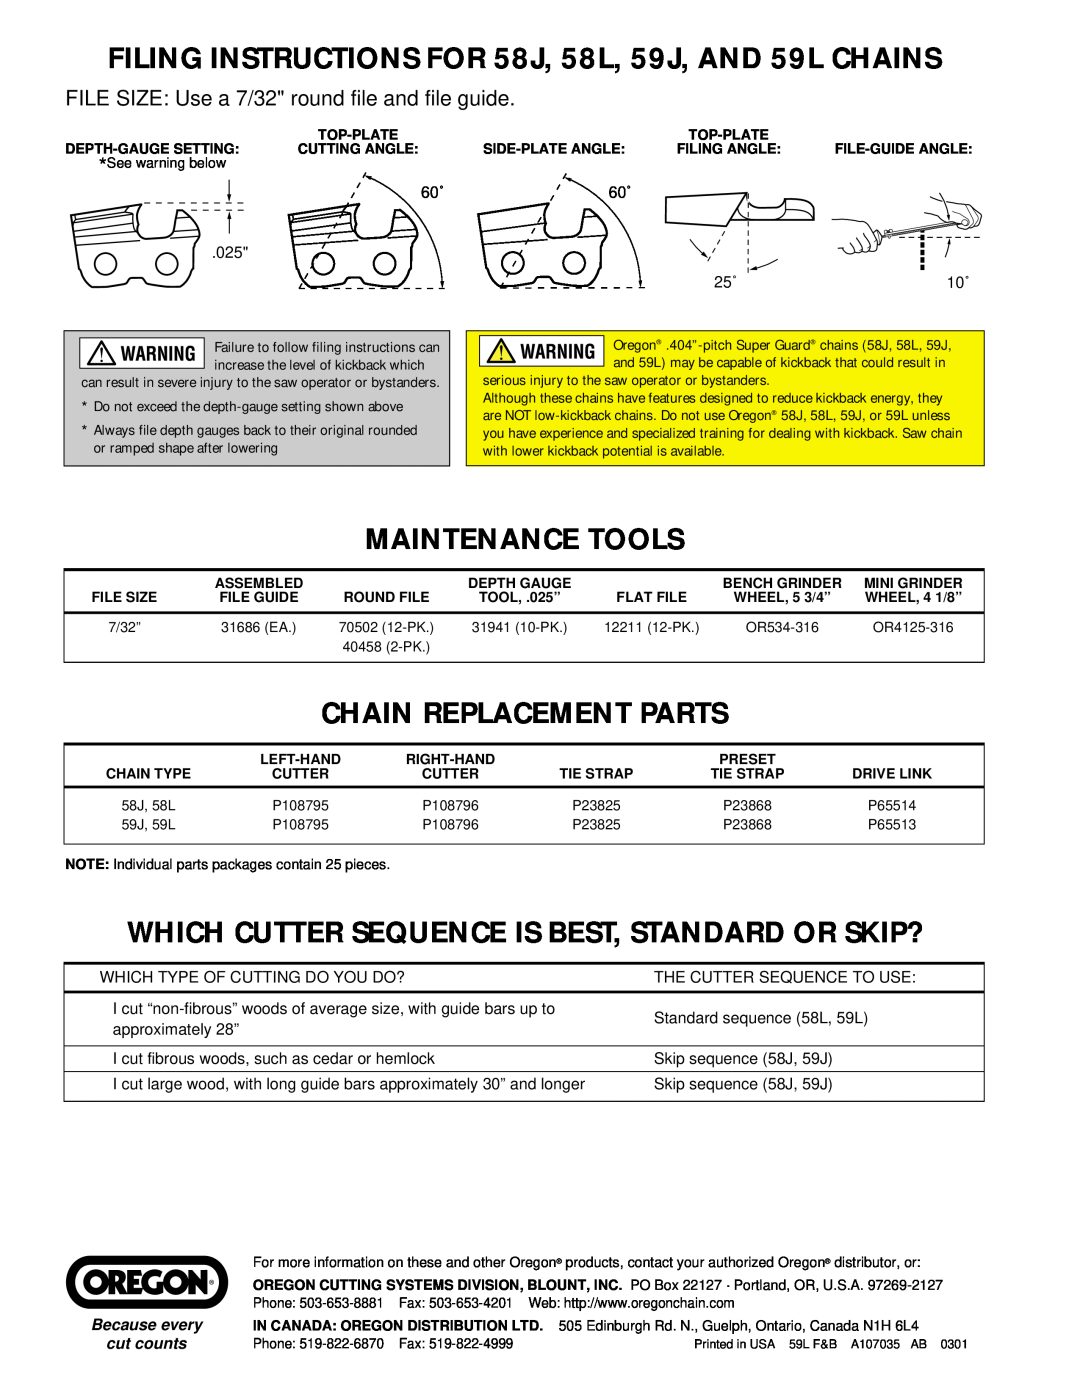 Oregon FILING INSTRUCTIONS FOR 58J, 58L, 59J, AND 59L CHAINS, Maintenance Tools, Chain Replacement Parts, cut counts 